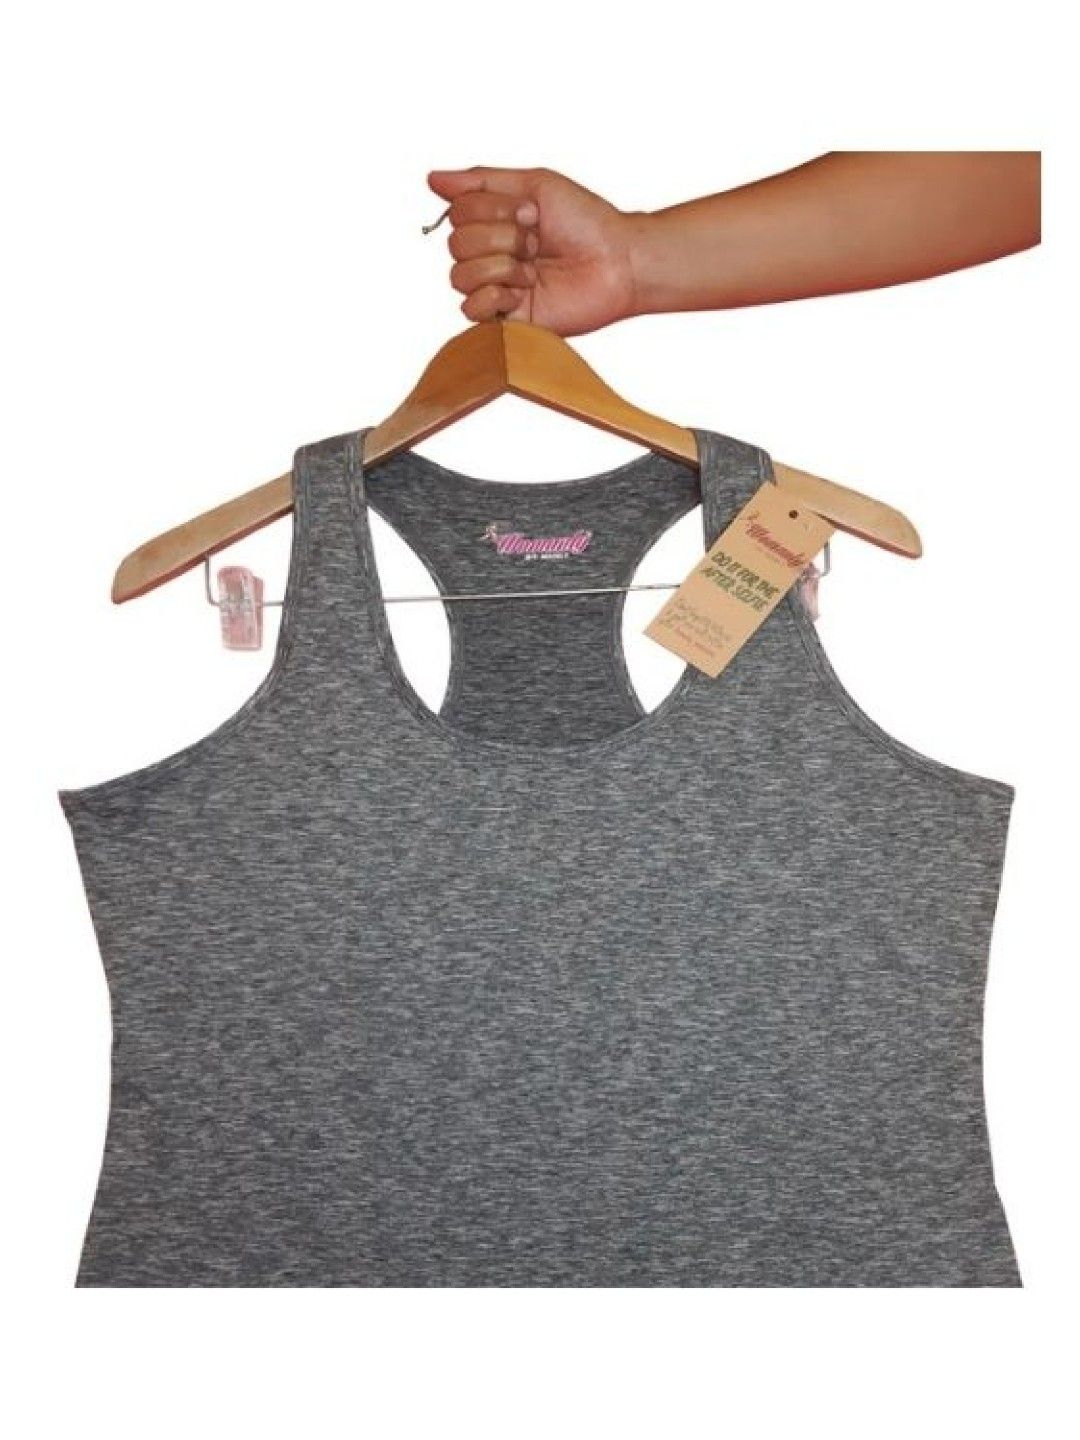 Womanly Dry Fit Ladies Muscle Tee